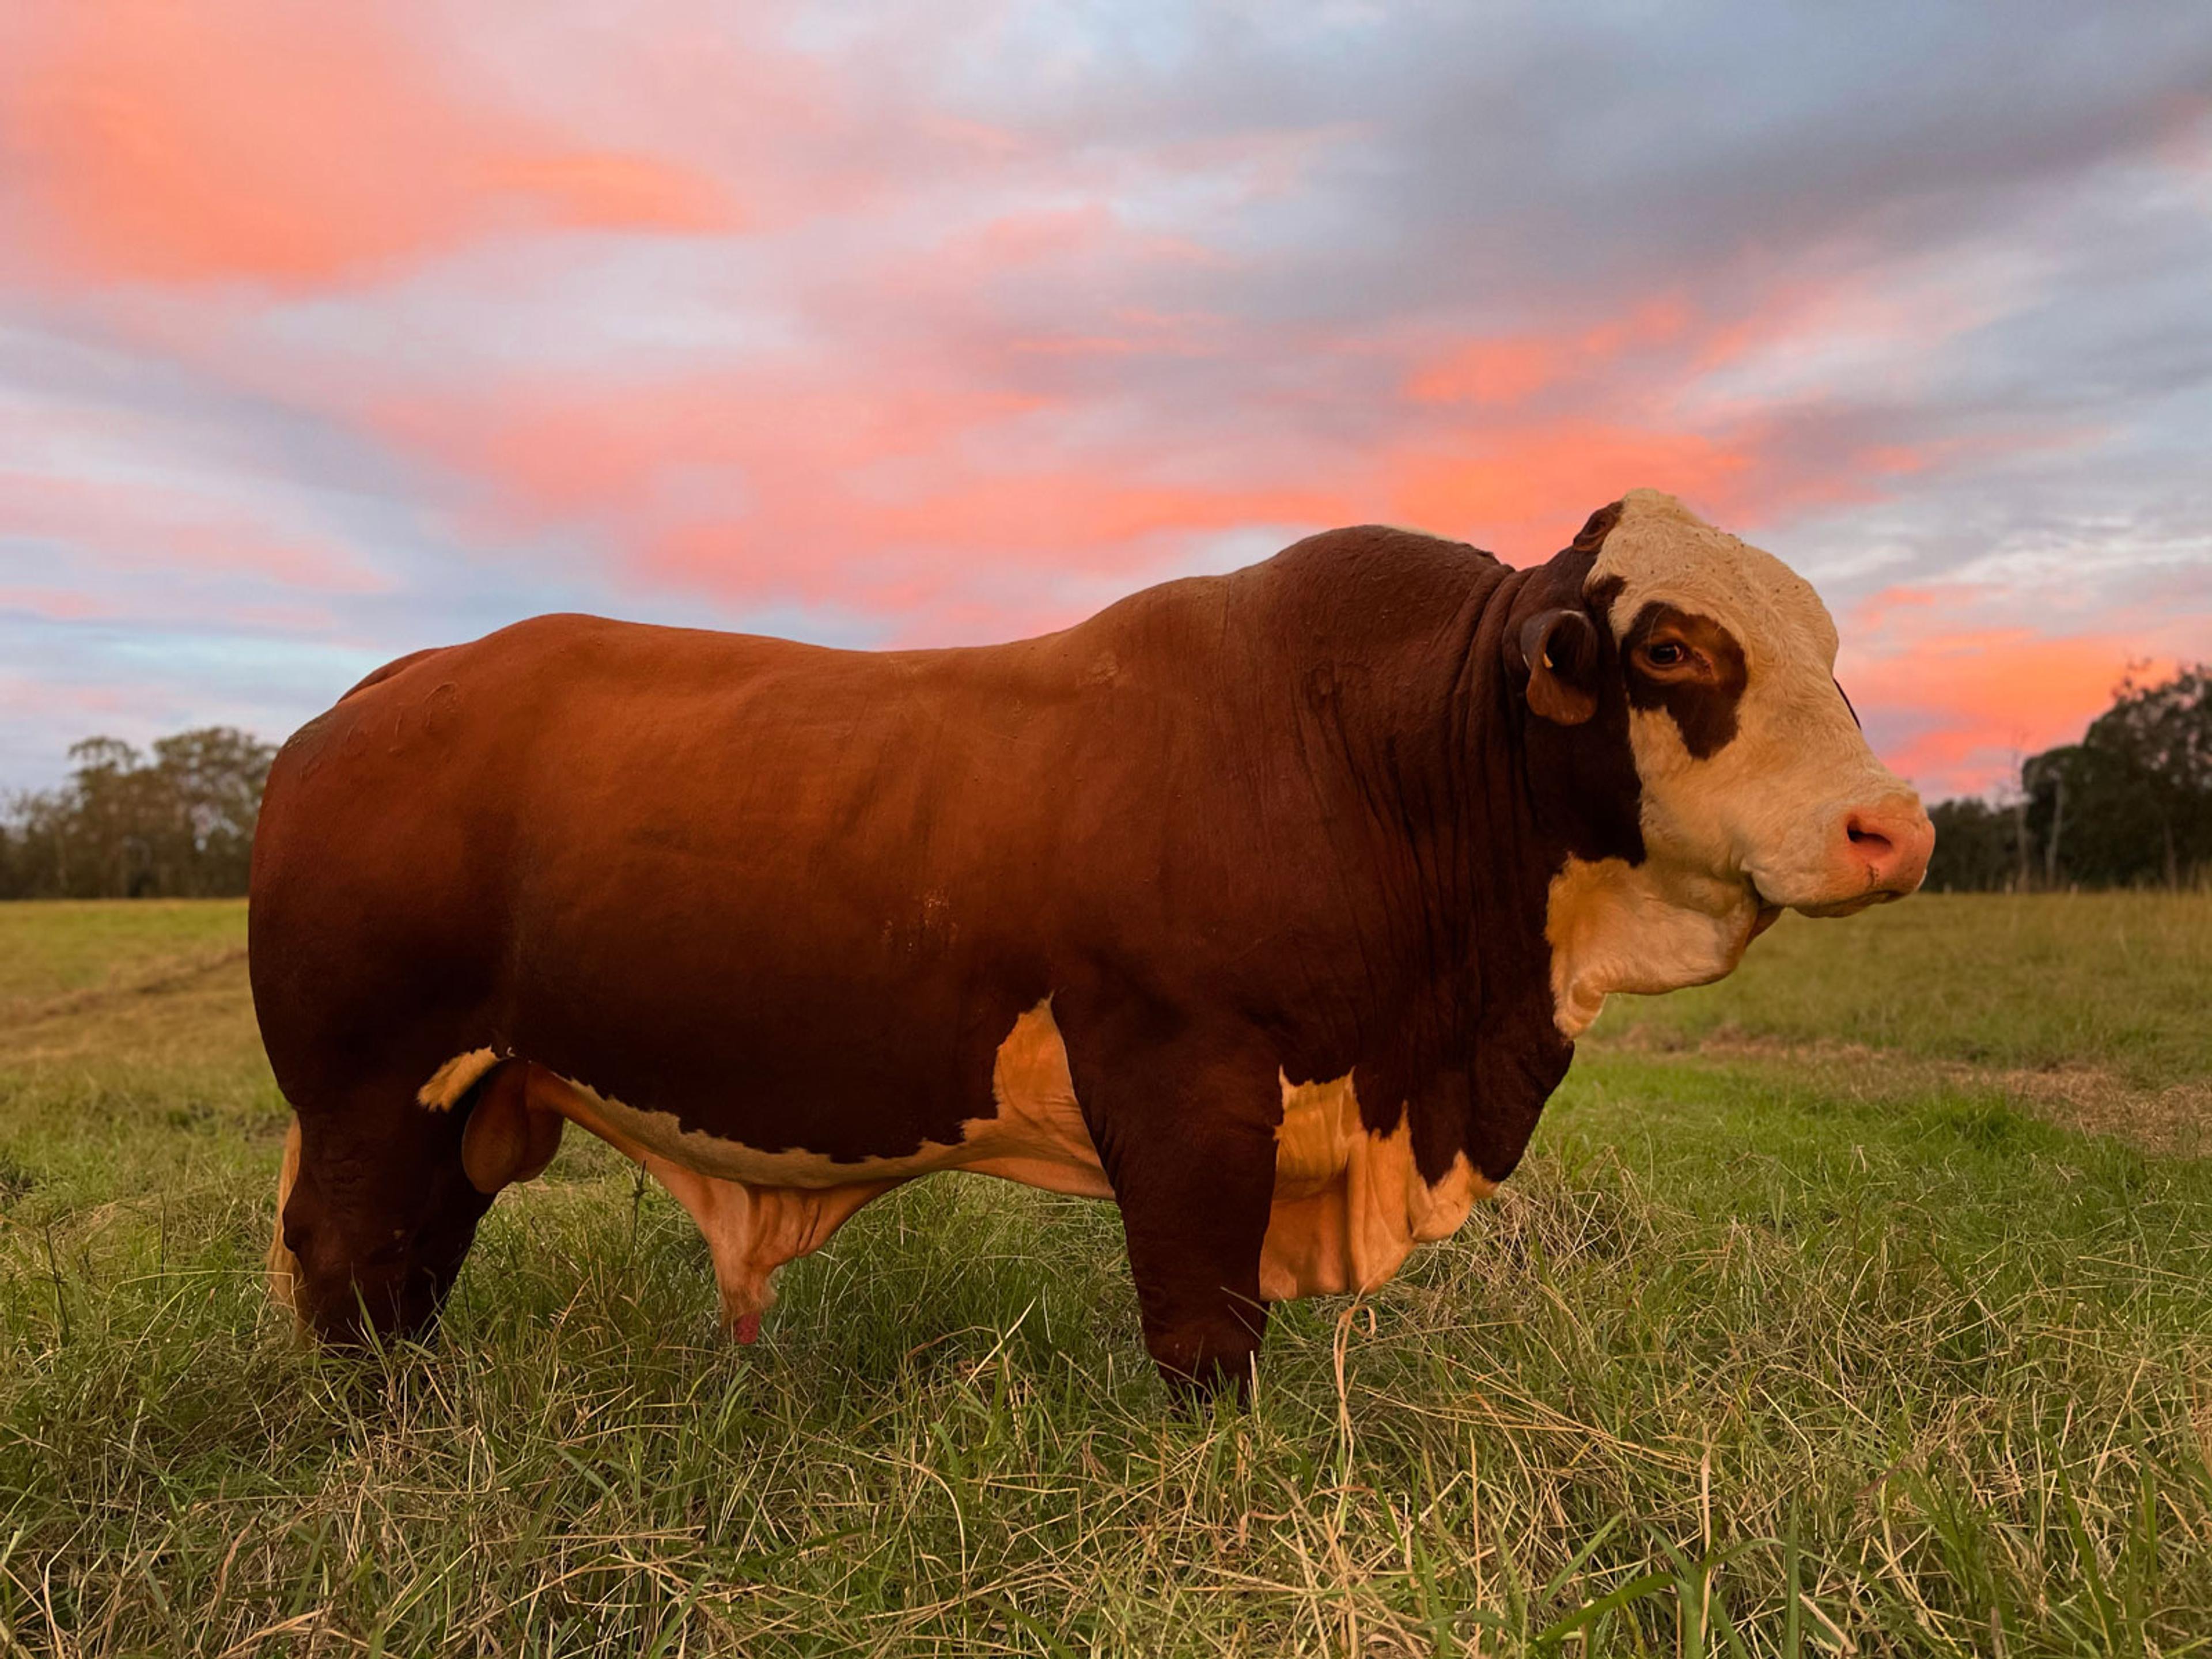 A brown and white cow in a paddock with a red sunrise sky in the background.